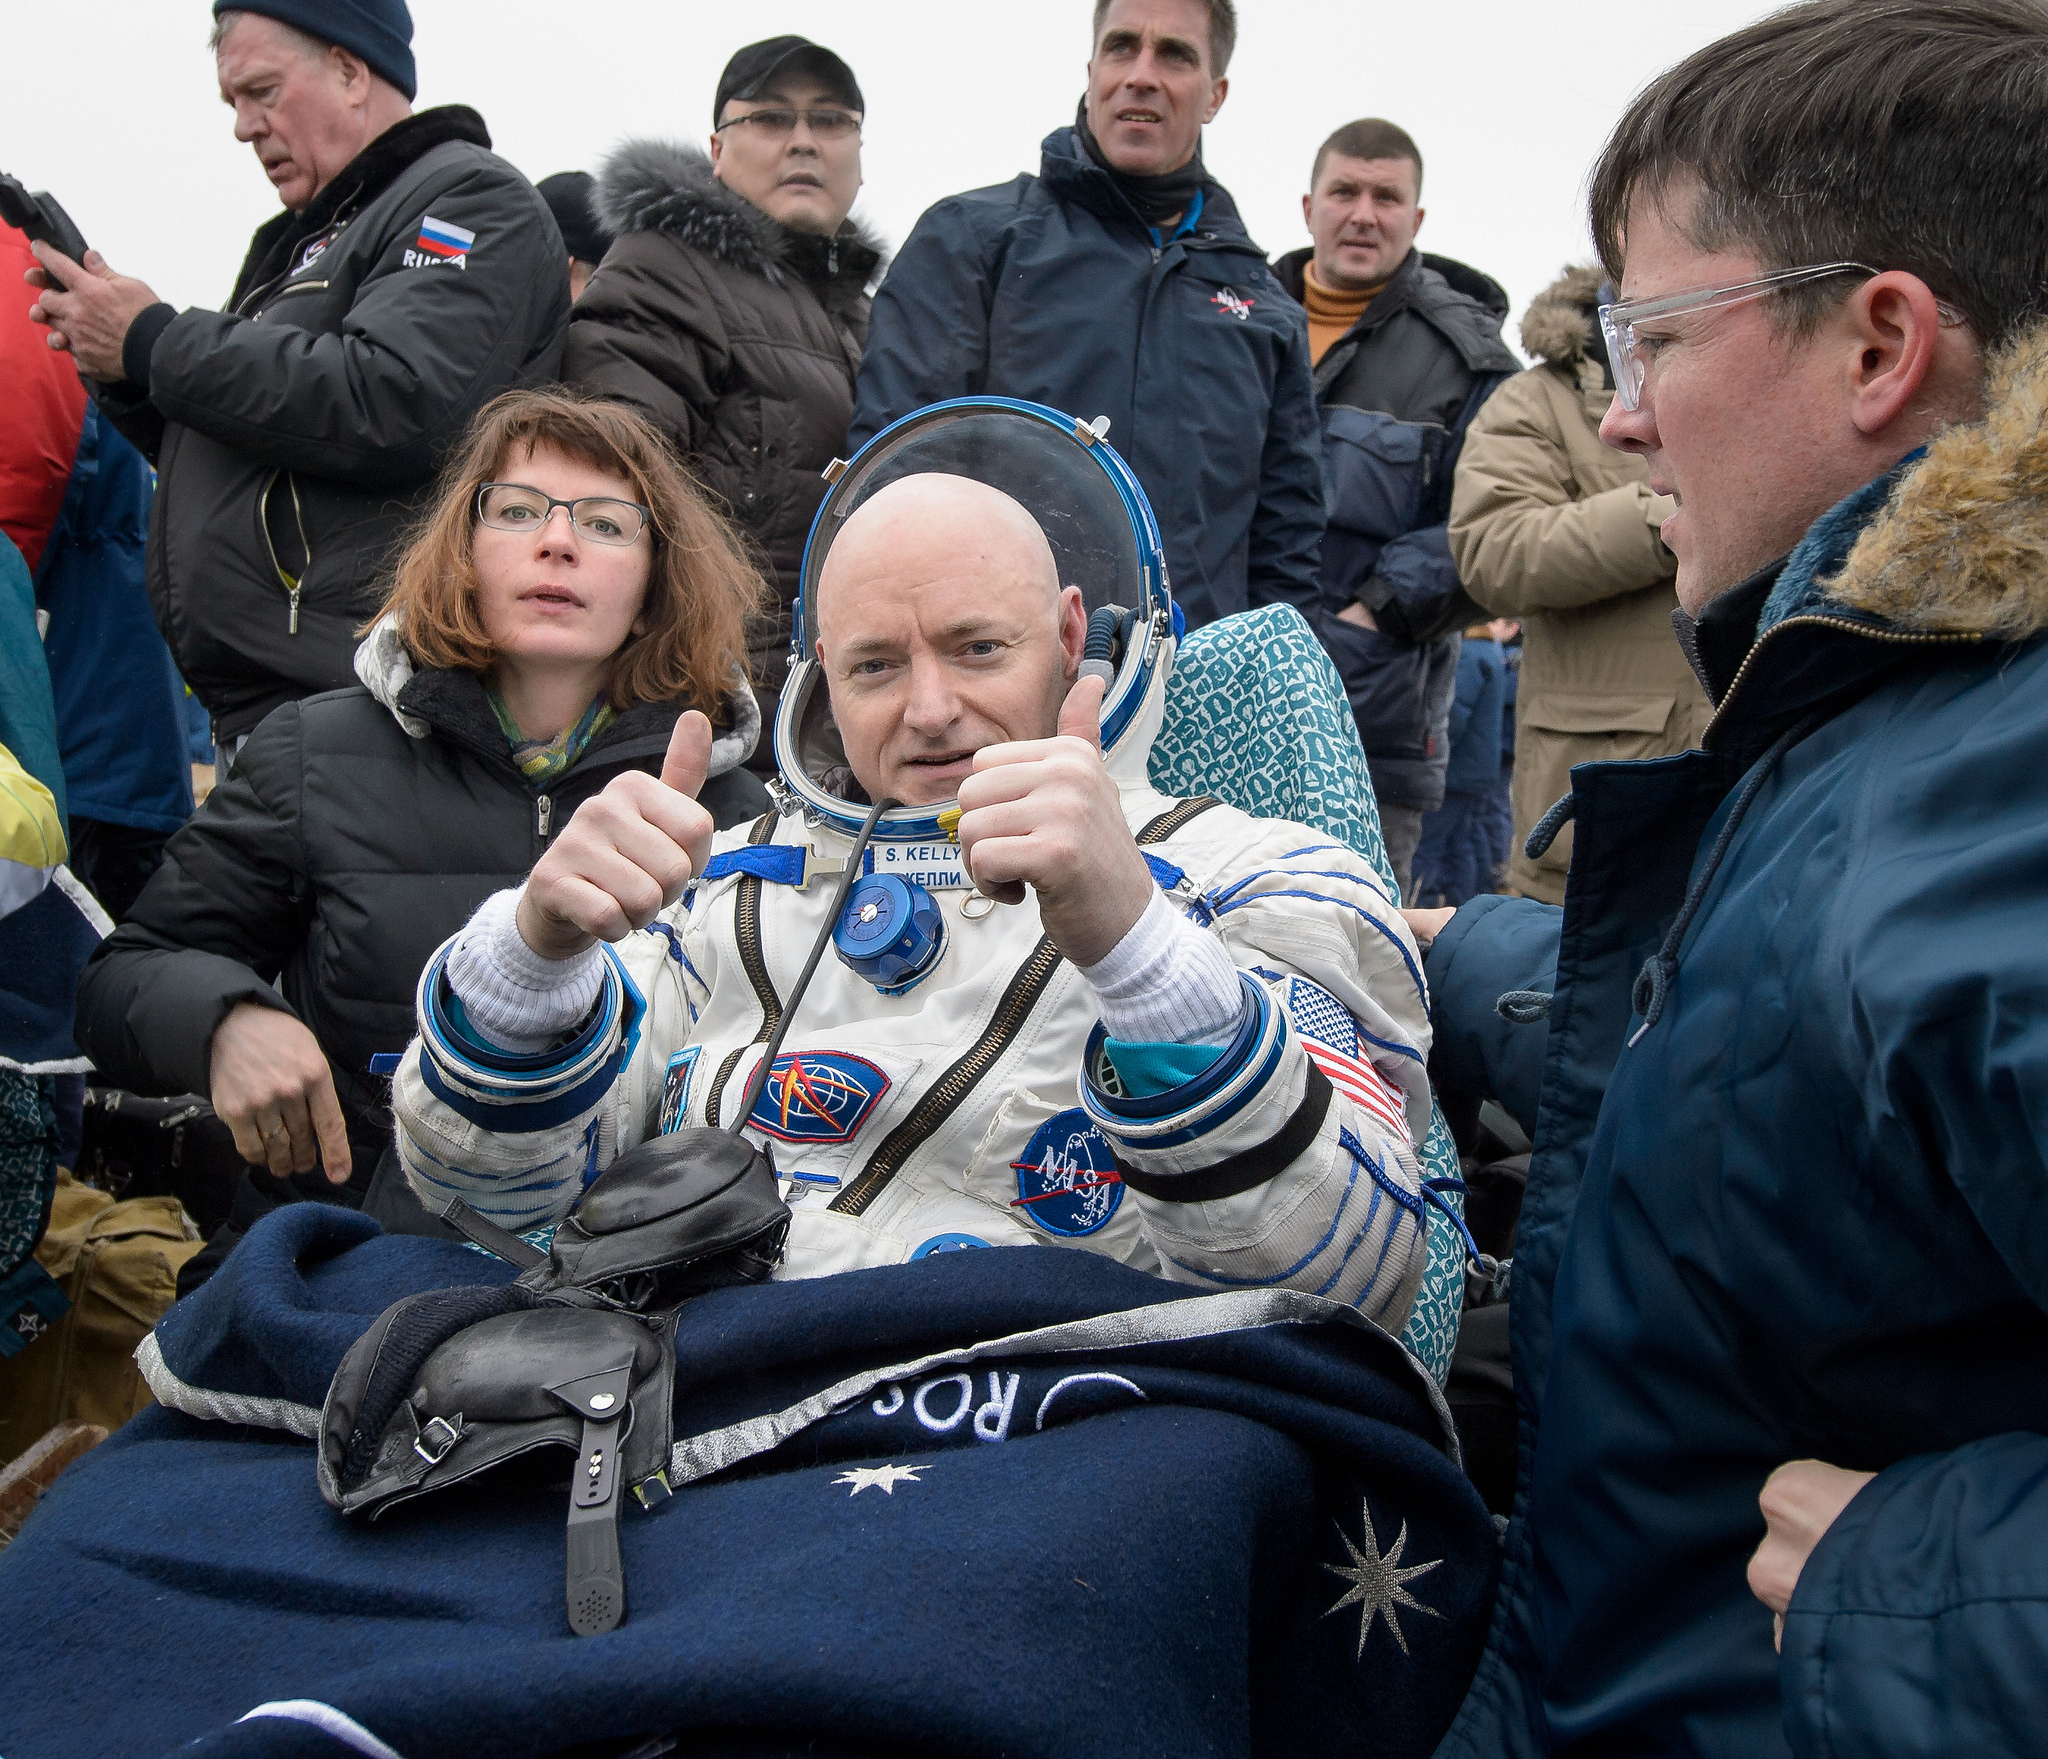 NASA astronaut Scott Kelly gives two thumbs up while resting up from a 340-day mission to the International Space Station. Kelly and two Russian crewmates landed their Soyuz capsule in a remote area of Kazakhstan on March 2, 2016 (Kazakh time).